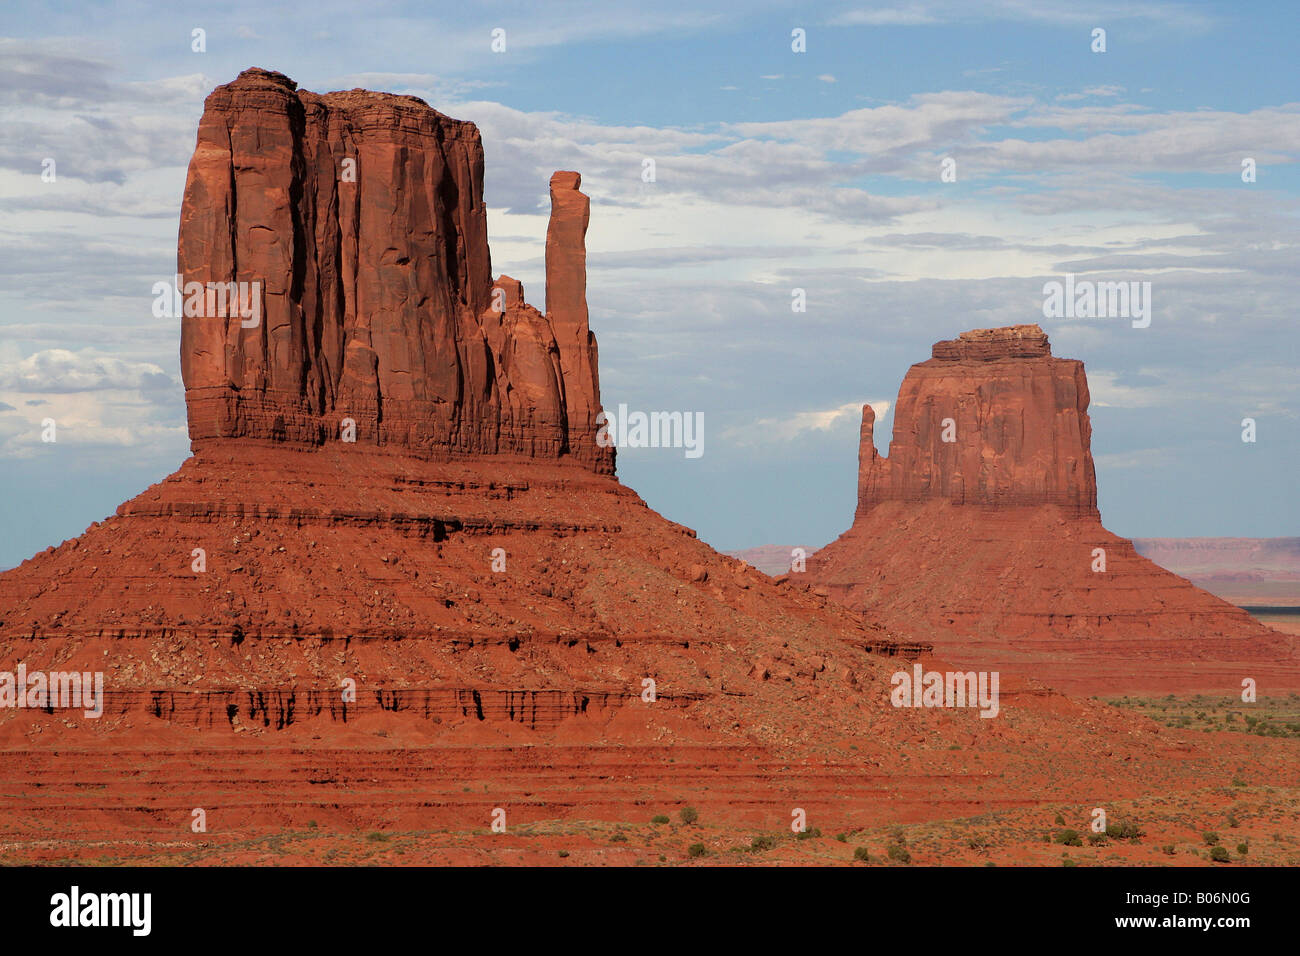 The Mittens in Monument Valley Navajo Tribal Park in Northern  Arizona/Southern Utah are iconic of America's desert Southwest Stock Photo  - Alamy